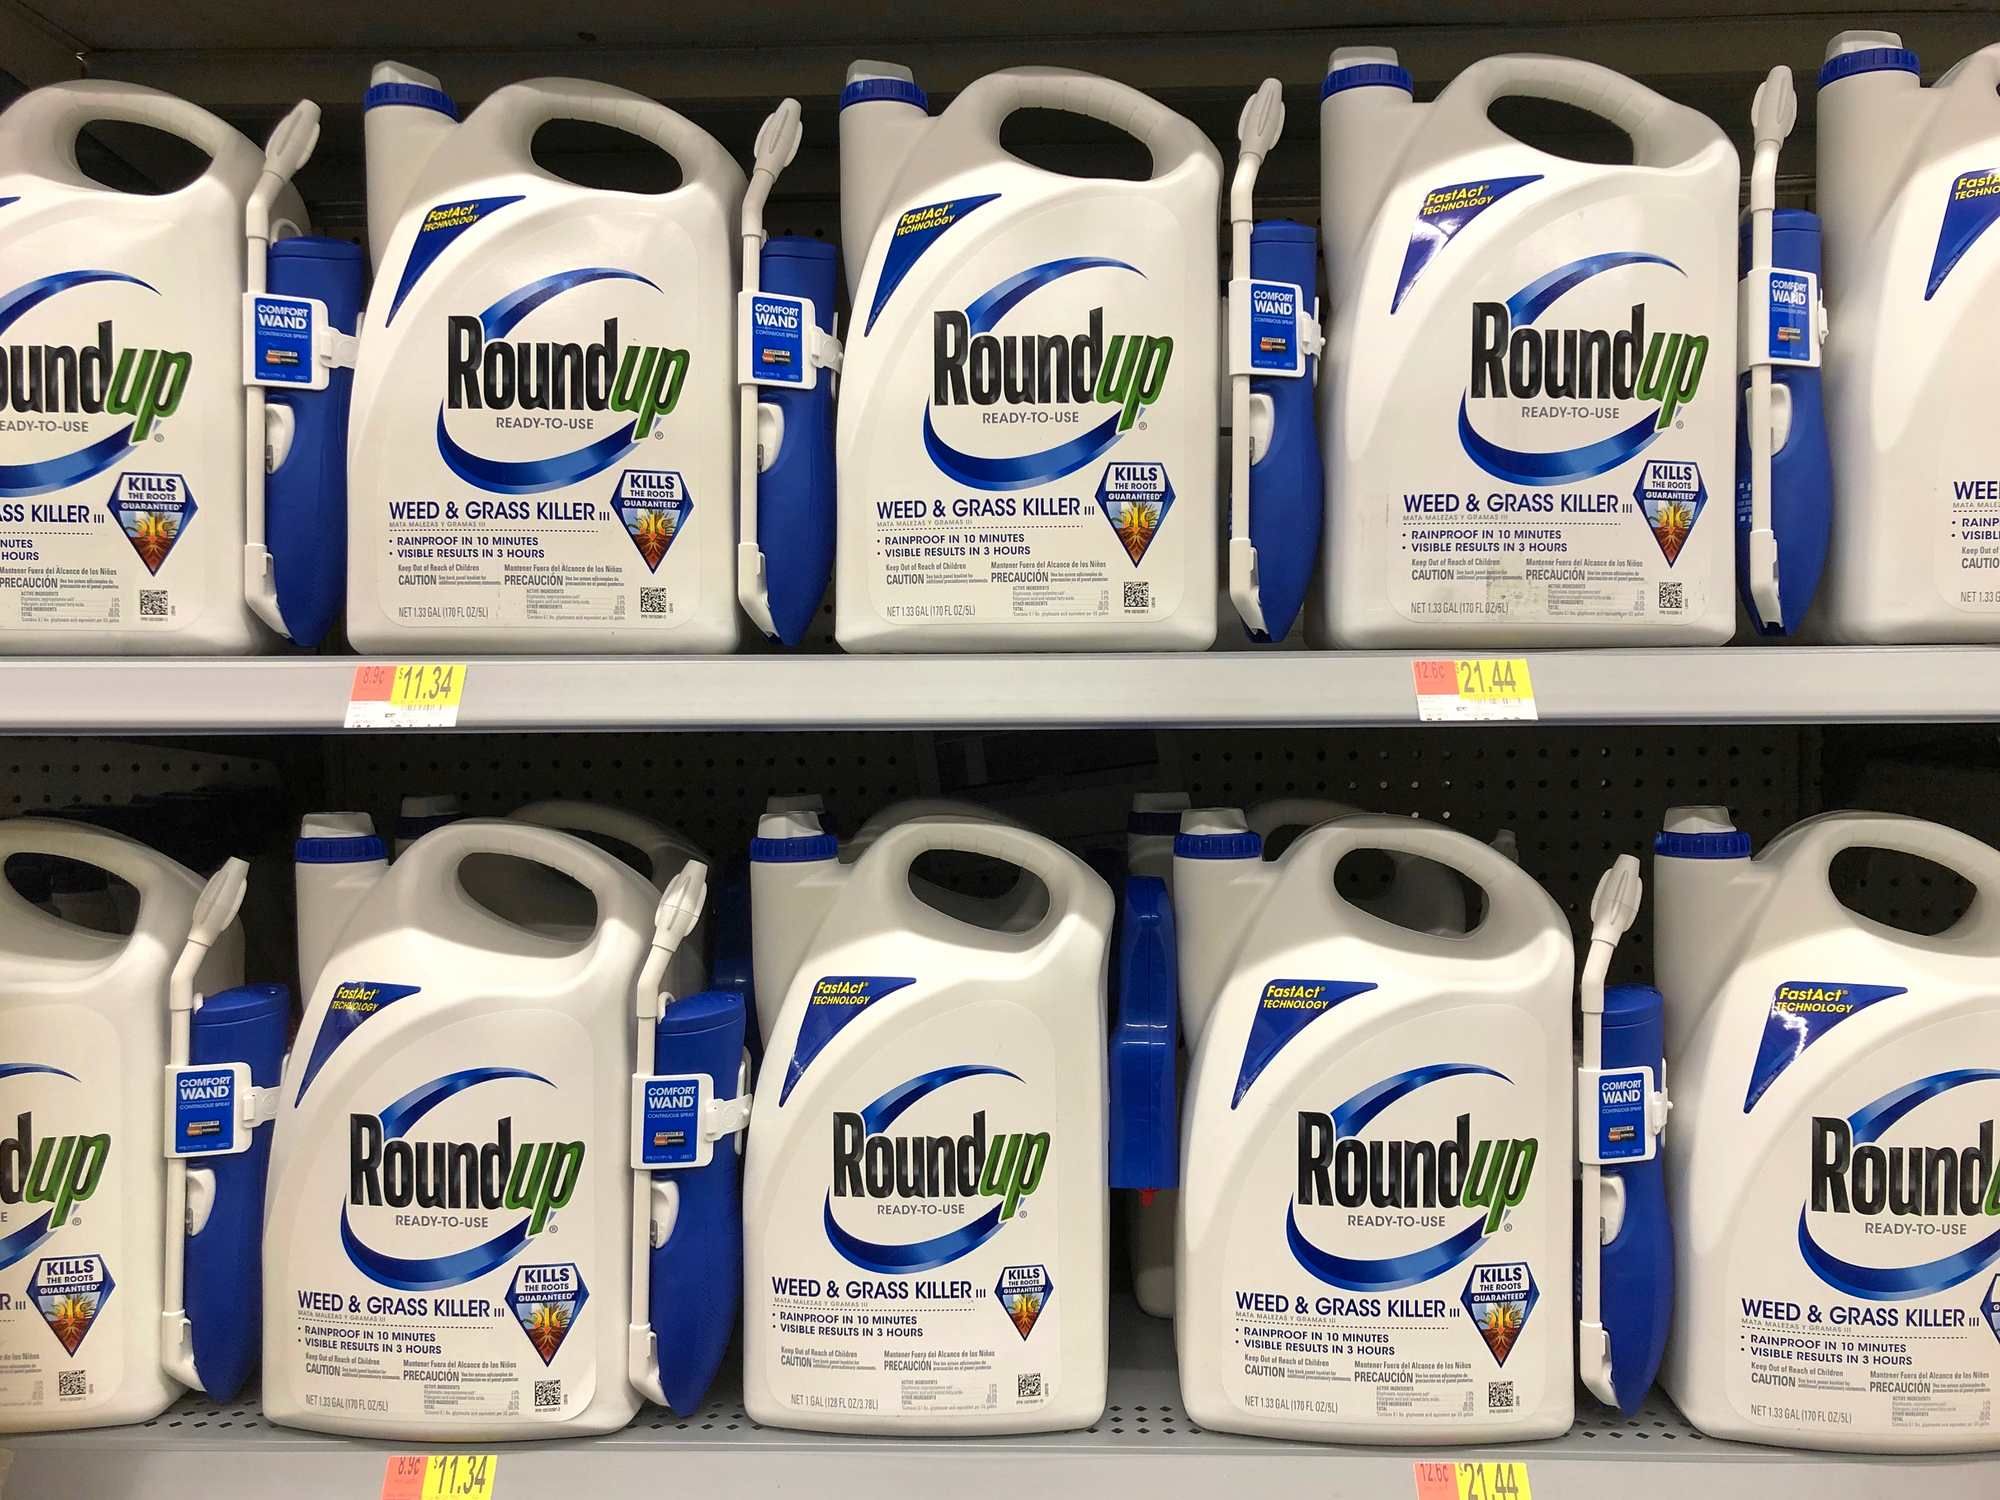 A settlement of up to $2 billion has been reached in litigation against Monsanto’s Roundup Weedkiller.